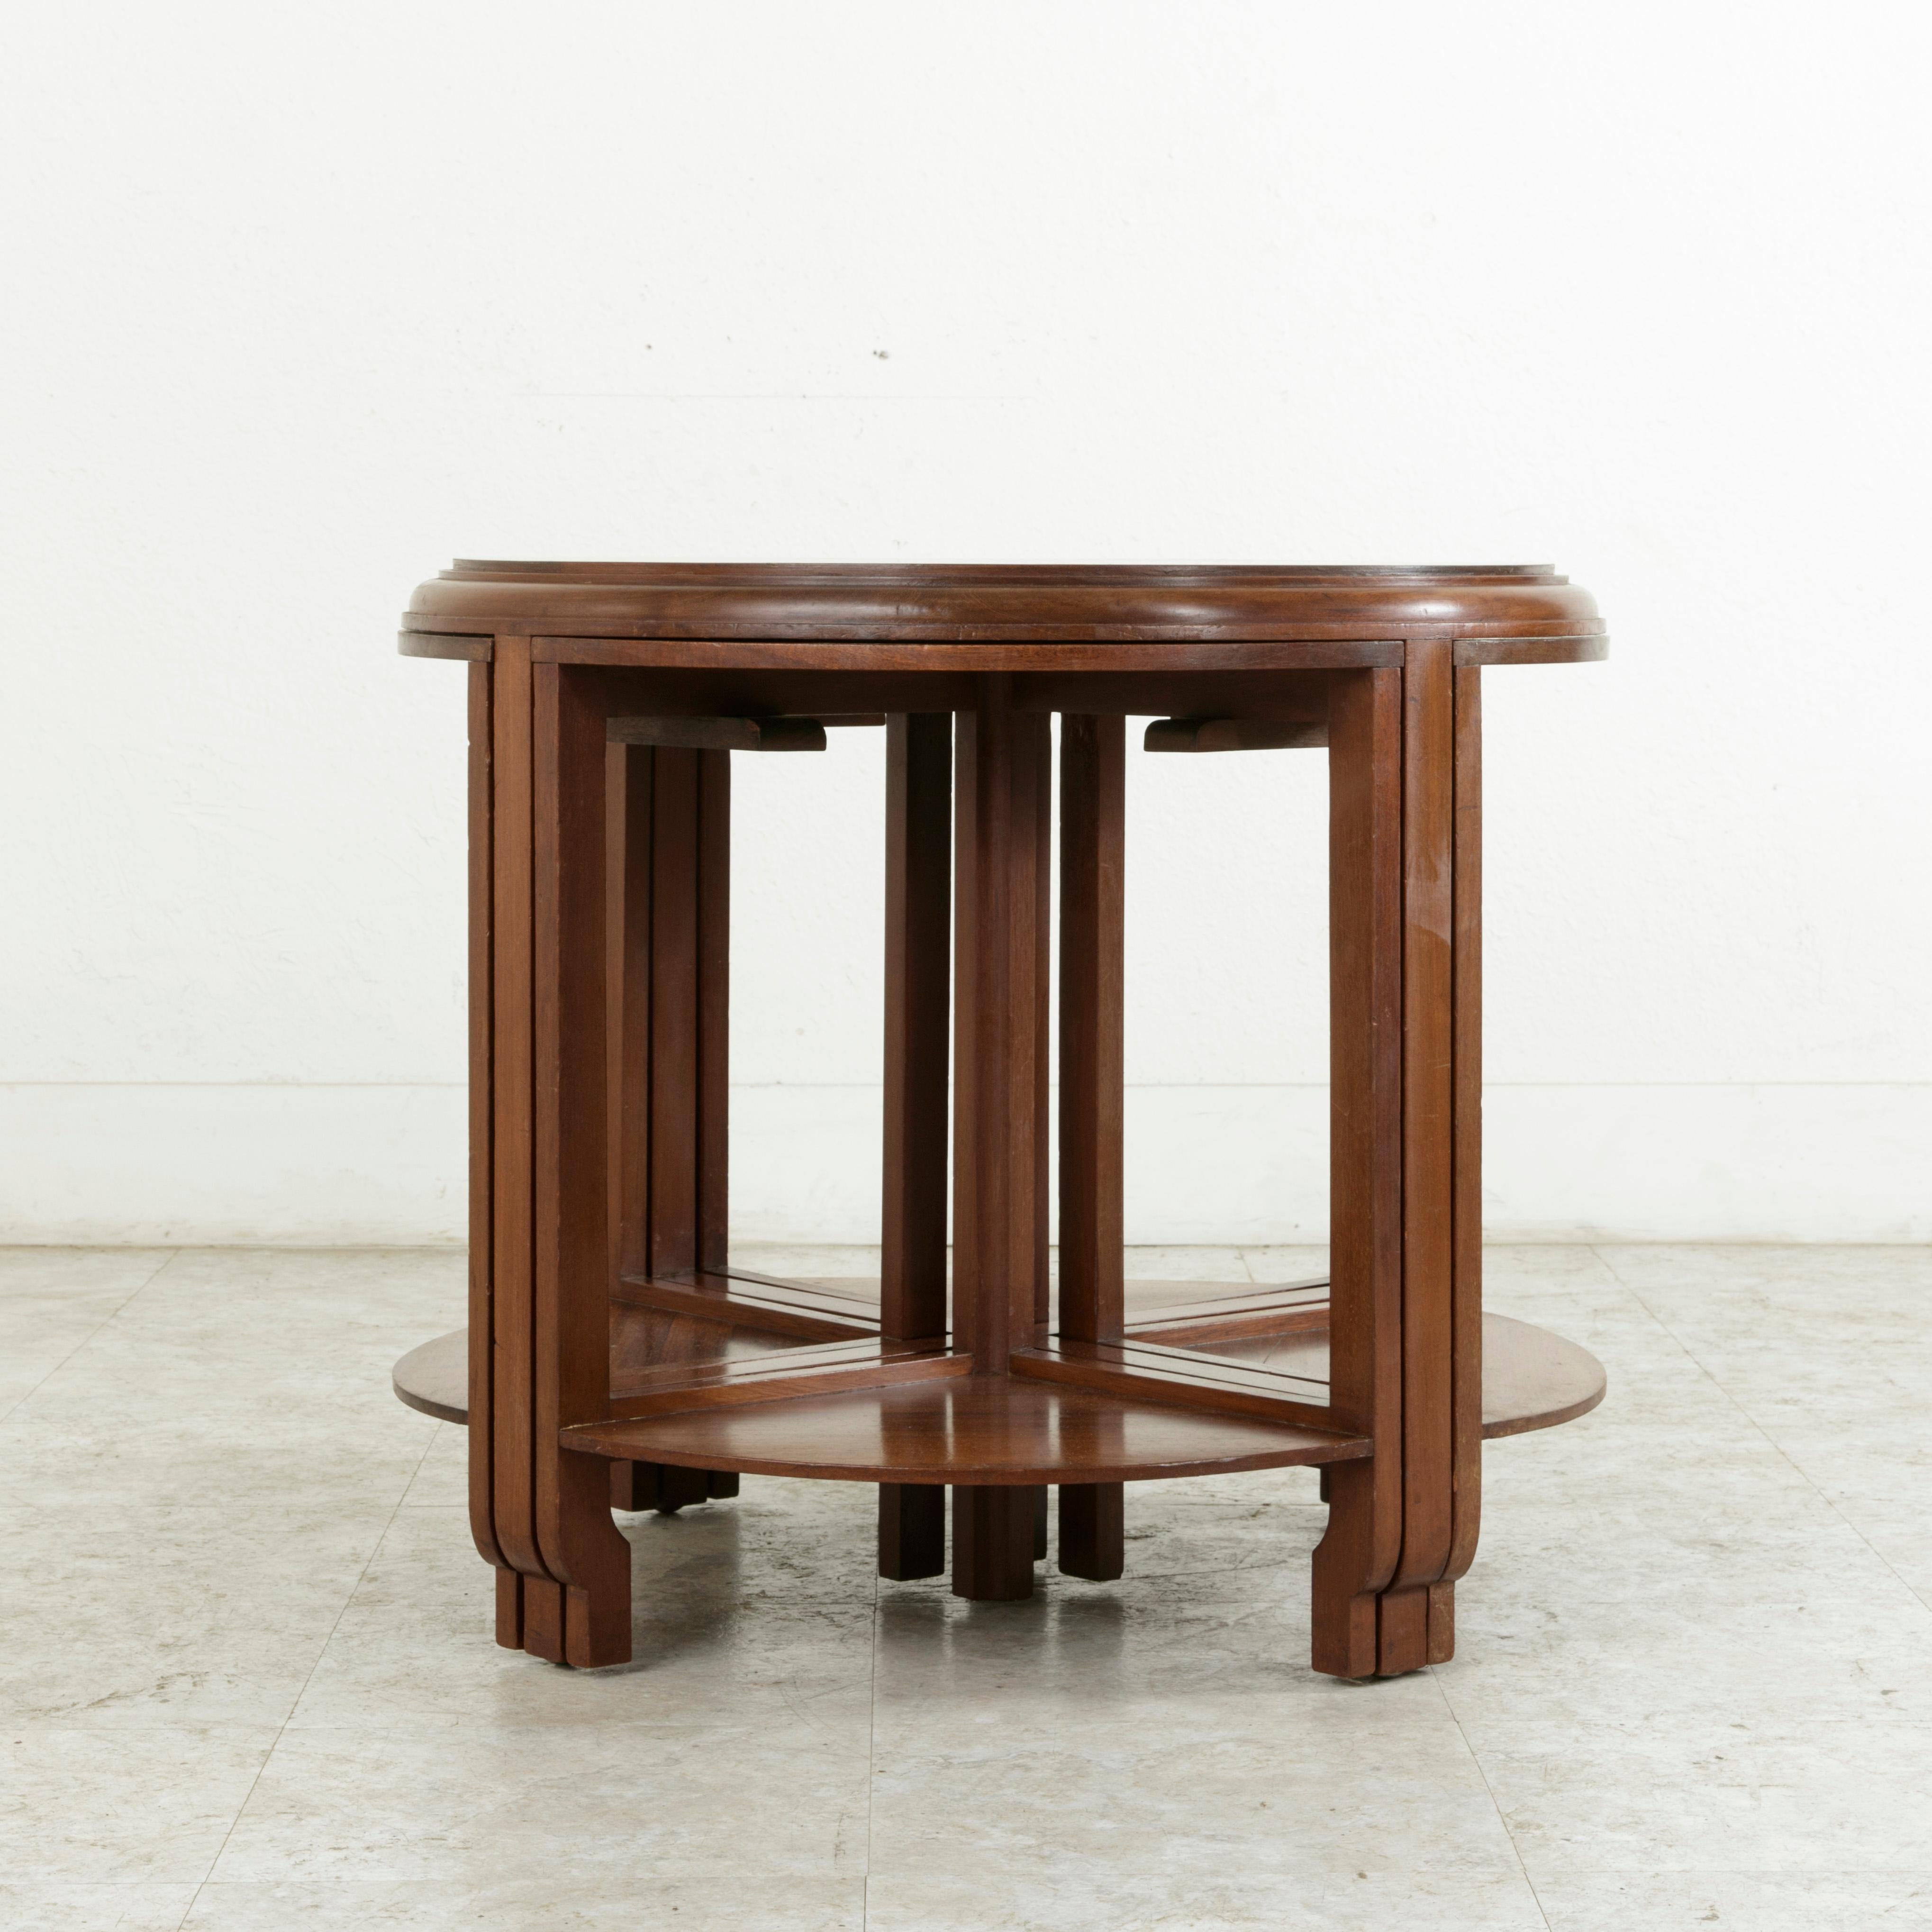 Palisander Early 20th Century French Art Deco Louis Majorelle Coffee Table, Nesting Tables For Sale